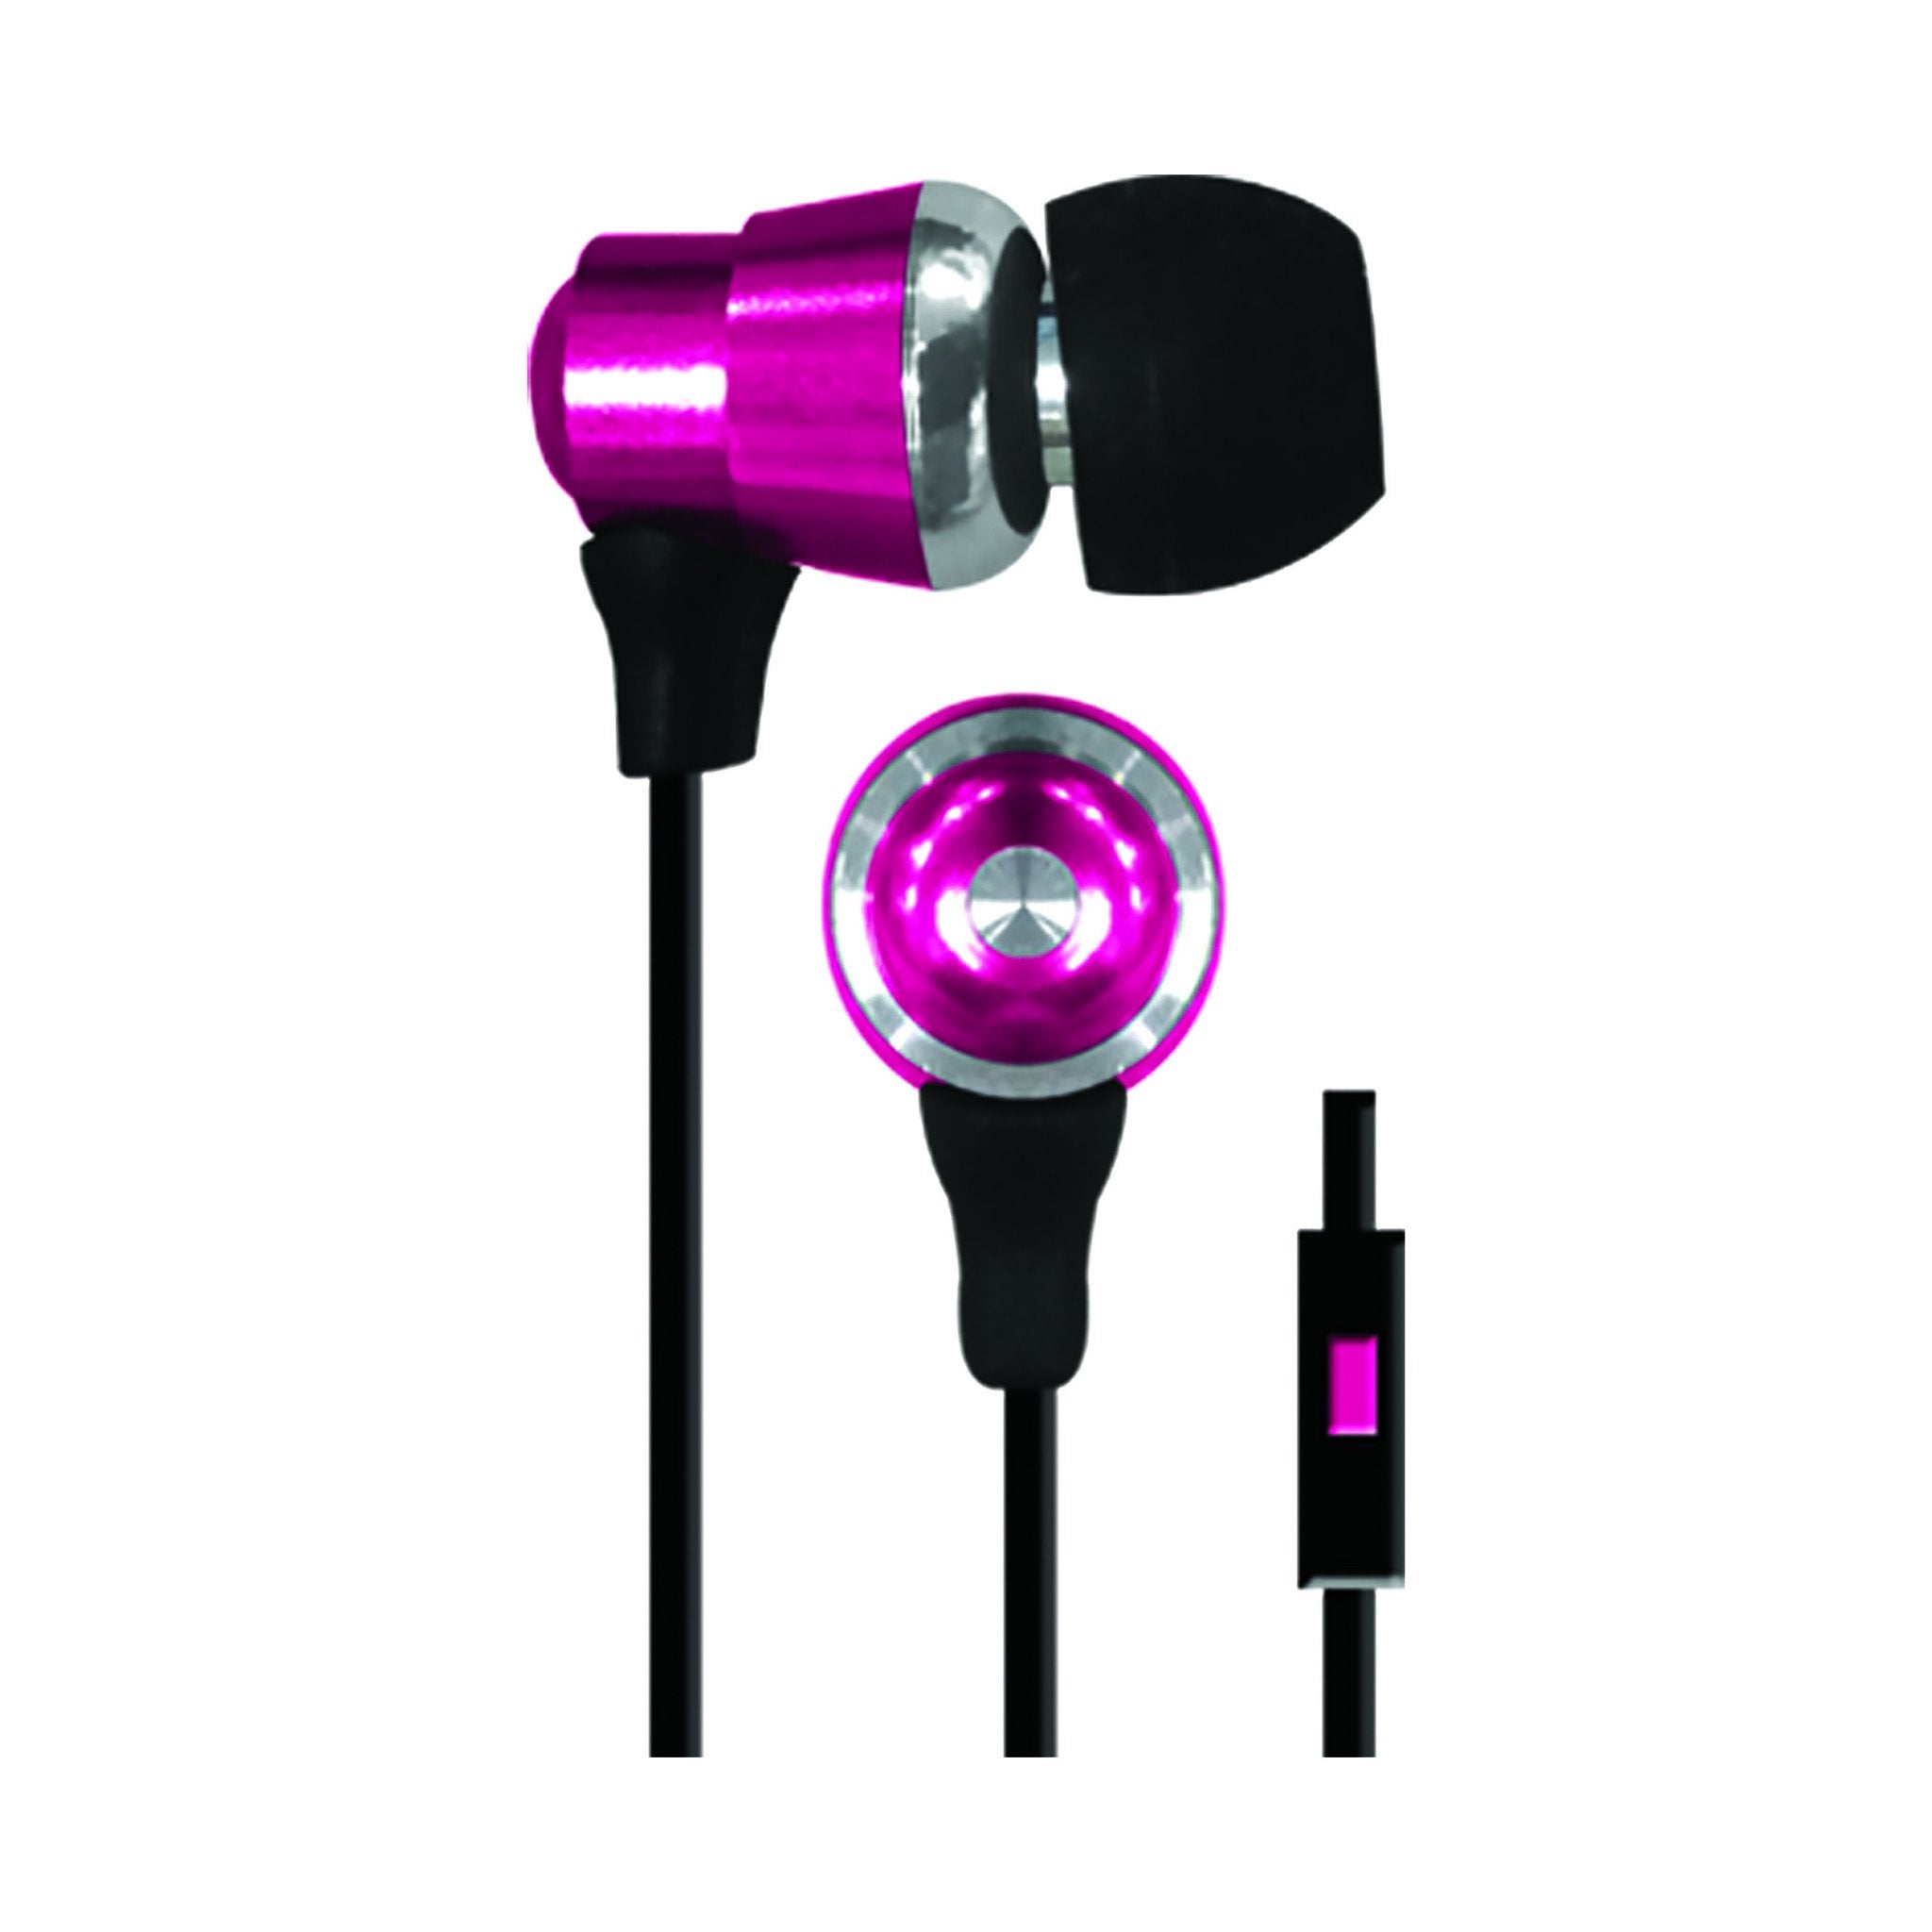 Metallic Stereo Earbuds